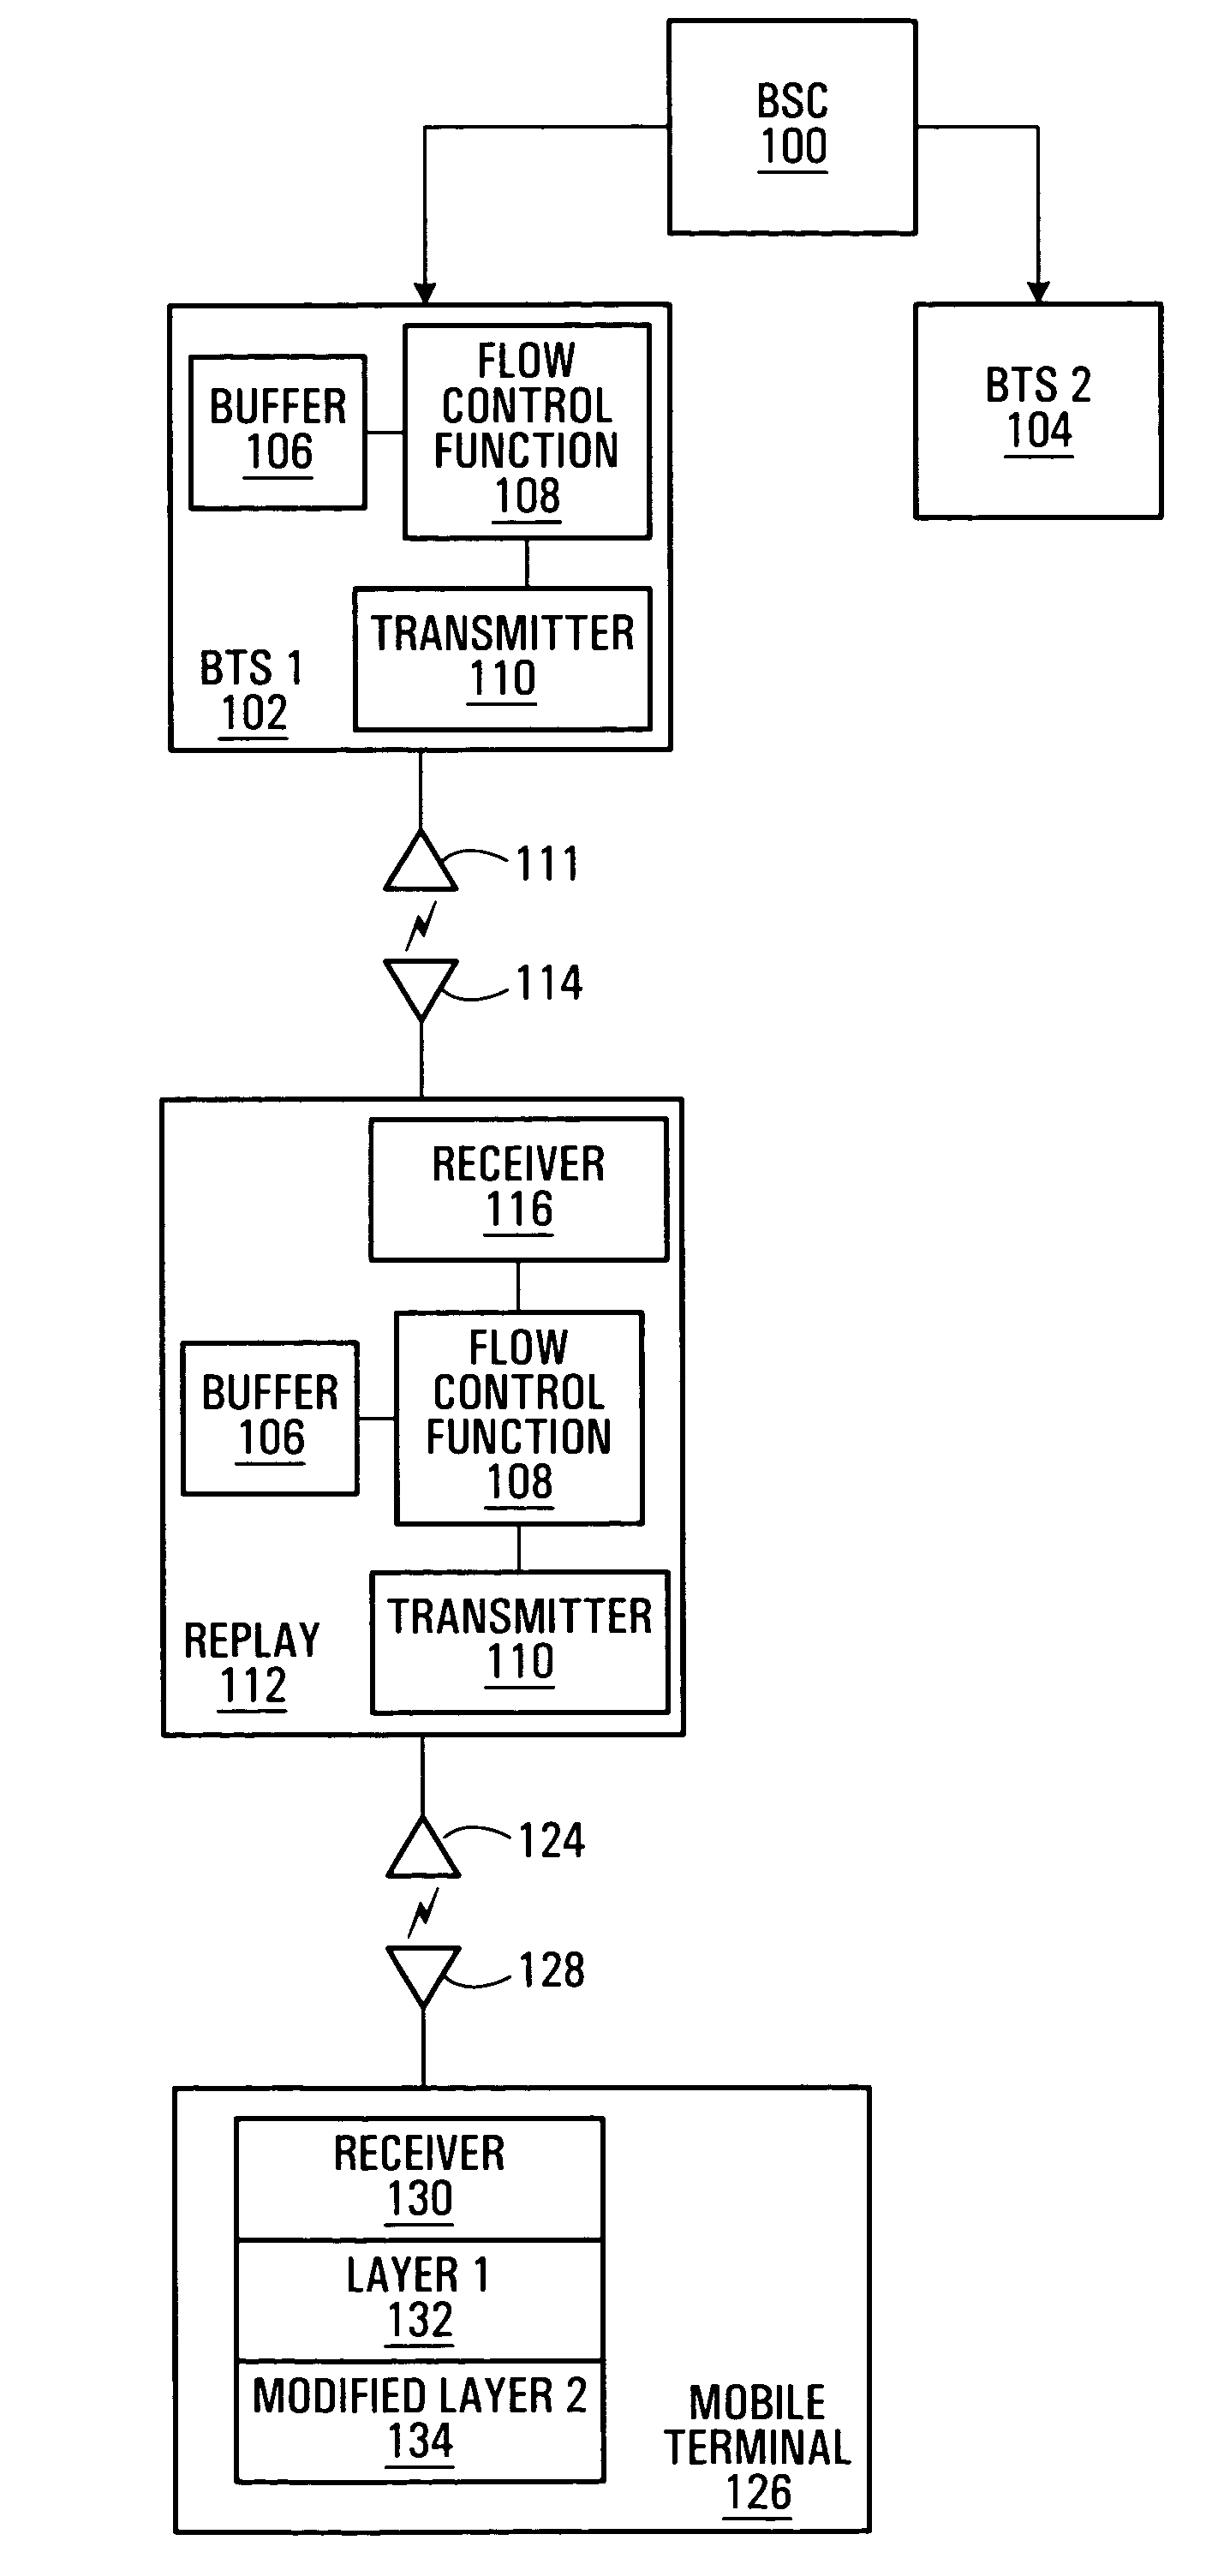 Method and system of flow control in multi-hop wireless access networks